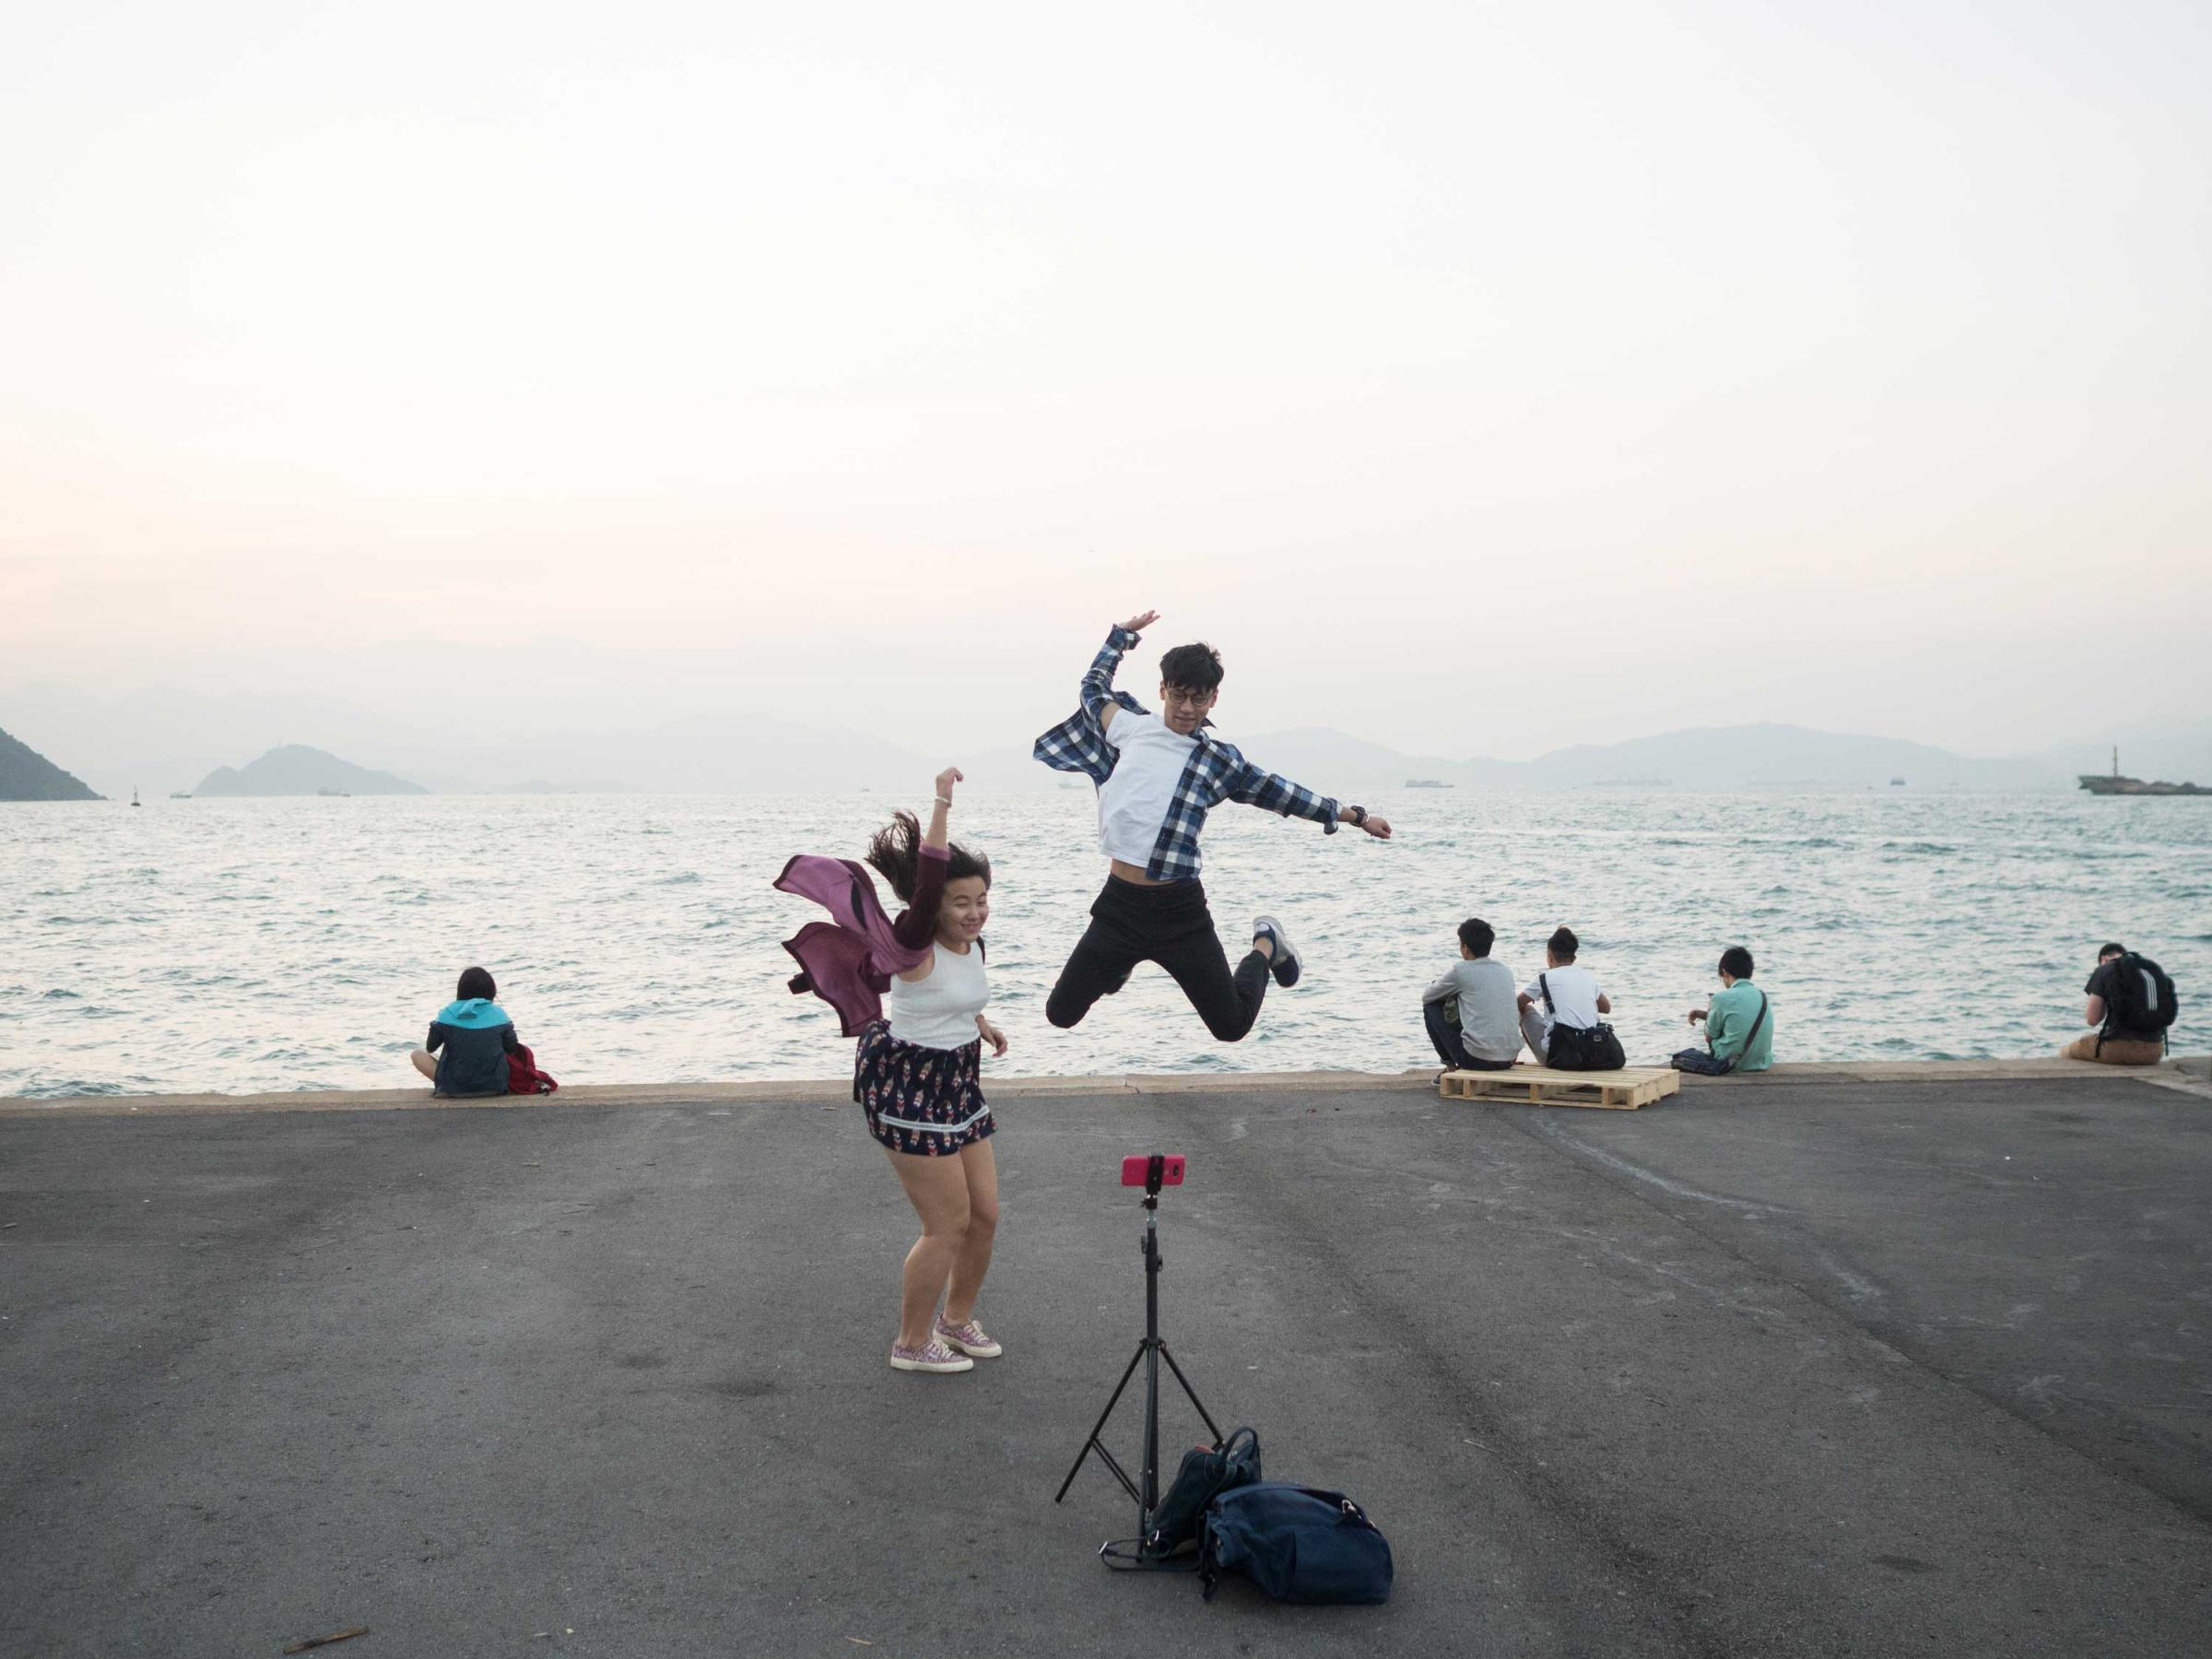 Hong Kong (Hong Kong SAR, China); Date (11, 03, 2016); A young couple practicing jumping in front of the camera; "Instagram pier" is a public cargo pier located on the west side of Hong Kong island; here locals gather for fishing, excercising or walking their pets. More recently the Pier has raised to fame as the “instagram Pier”, where young Hong Kongers and instagrammers come for selfies and scenic photos. I have recently begun curating its "instagram"  dedicated account (@insta_pier).